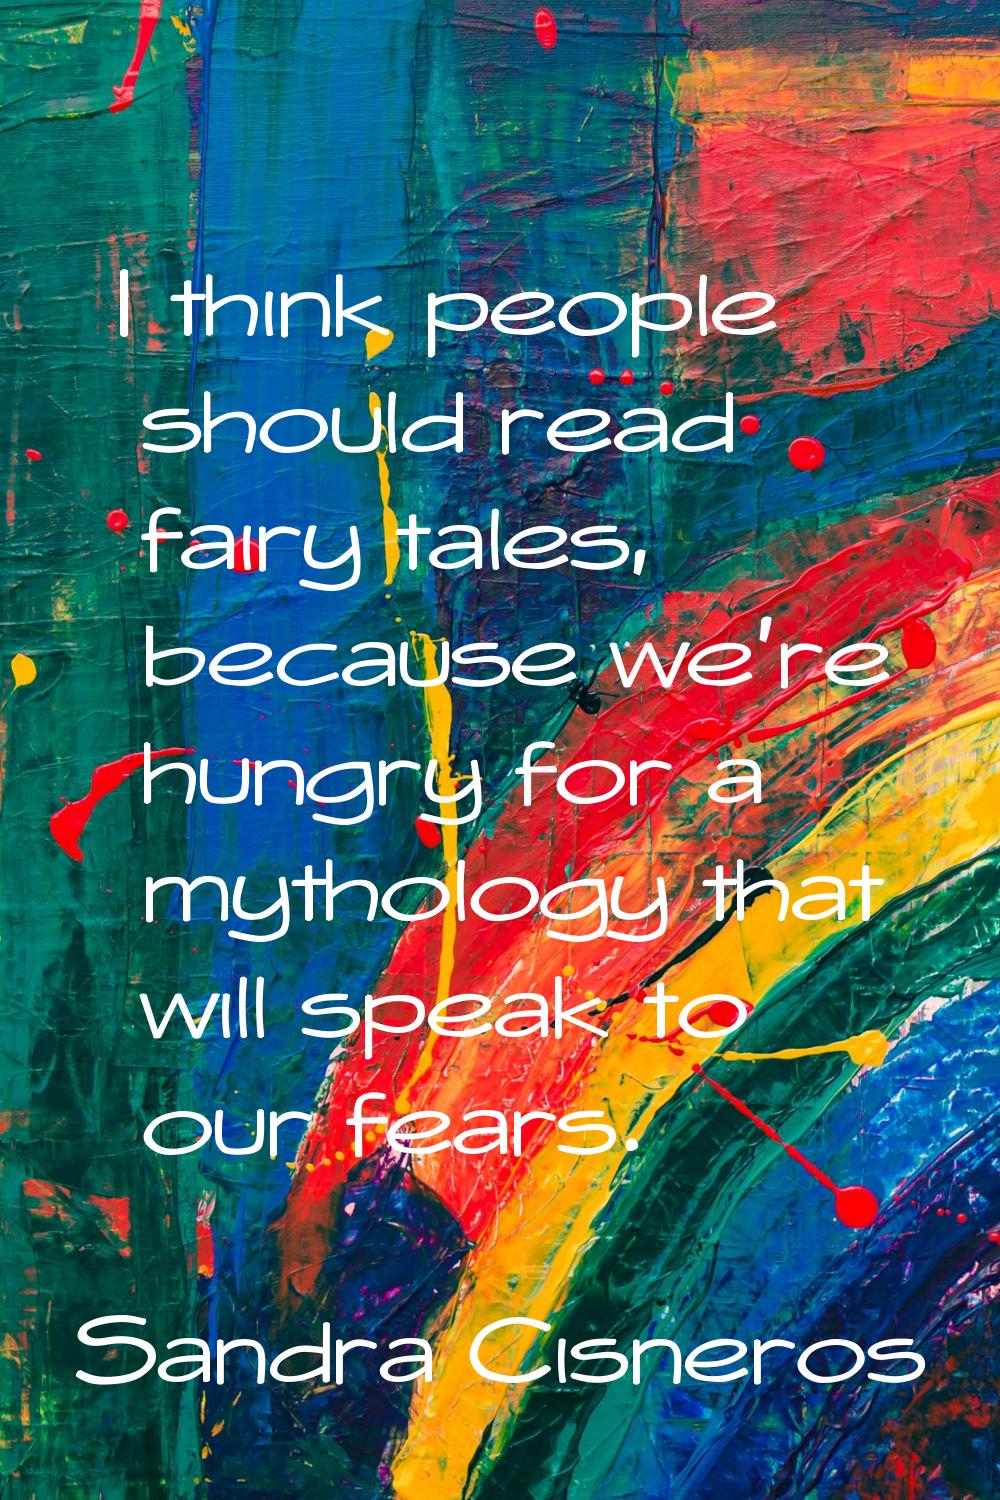 I think people should read fairy tales, because we're hungry for a mythology that will speak to our